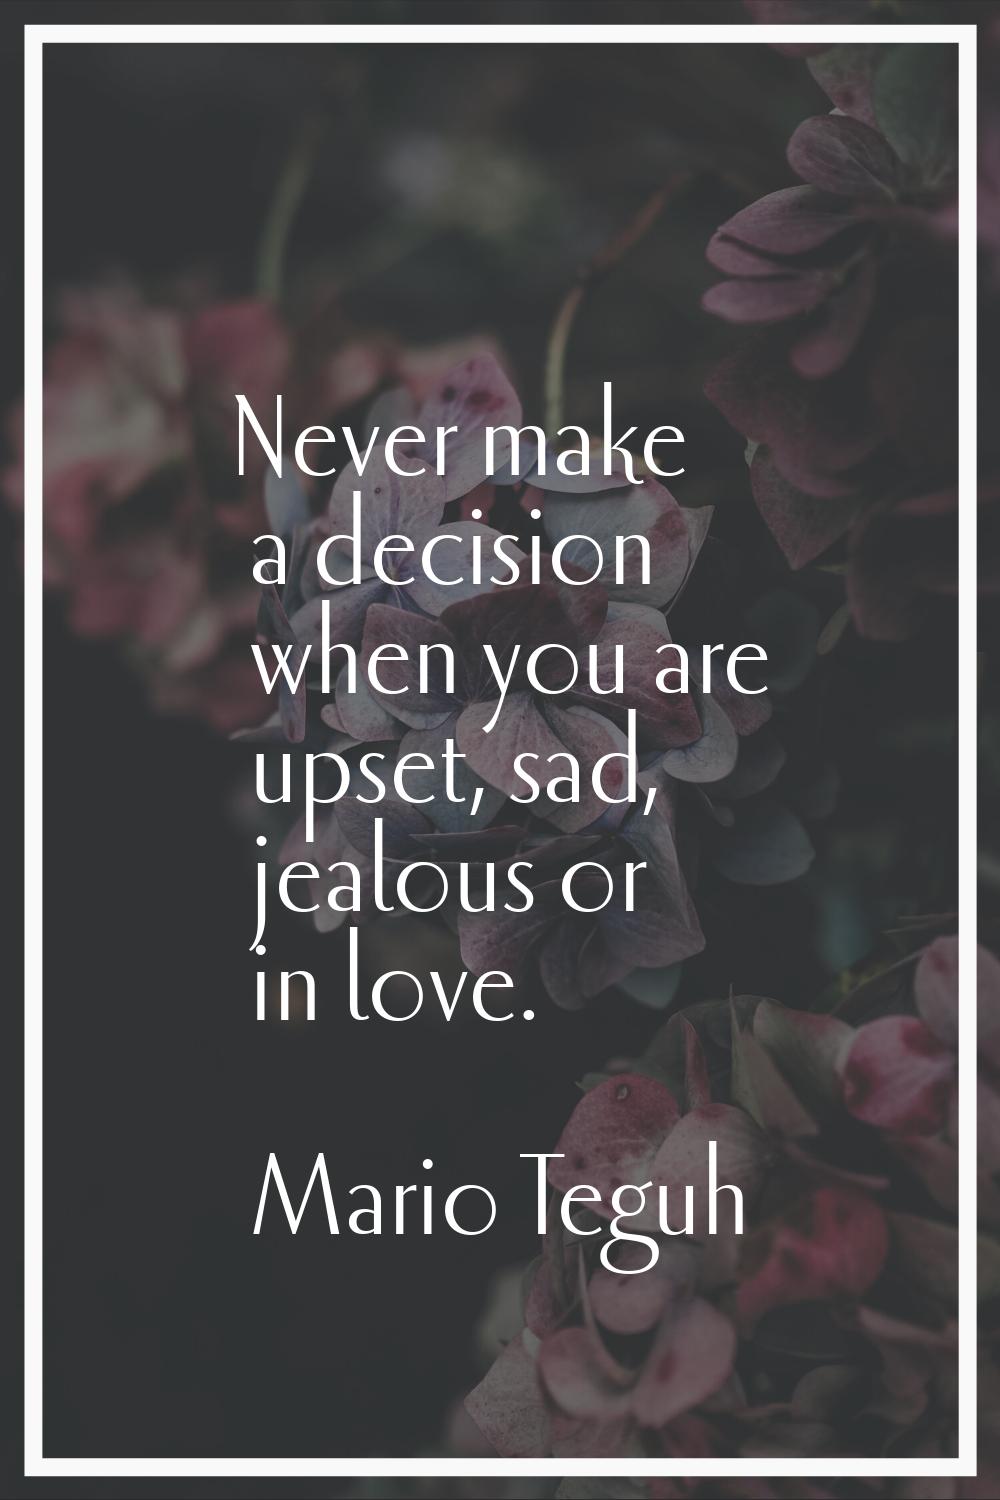 Never make a decision when you are upset, sad, jealous or in love.